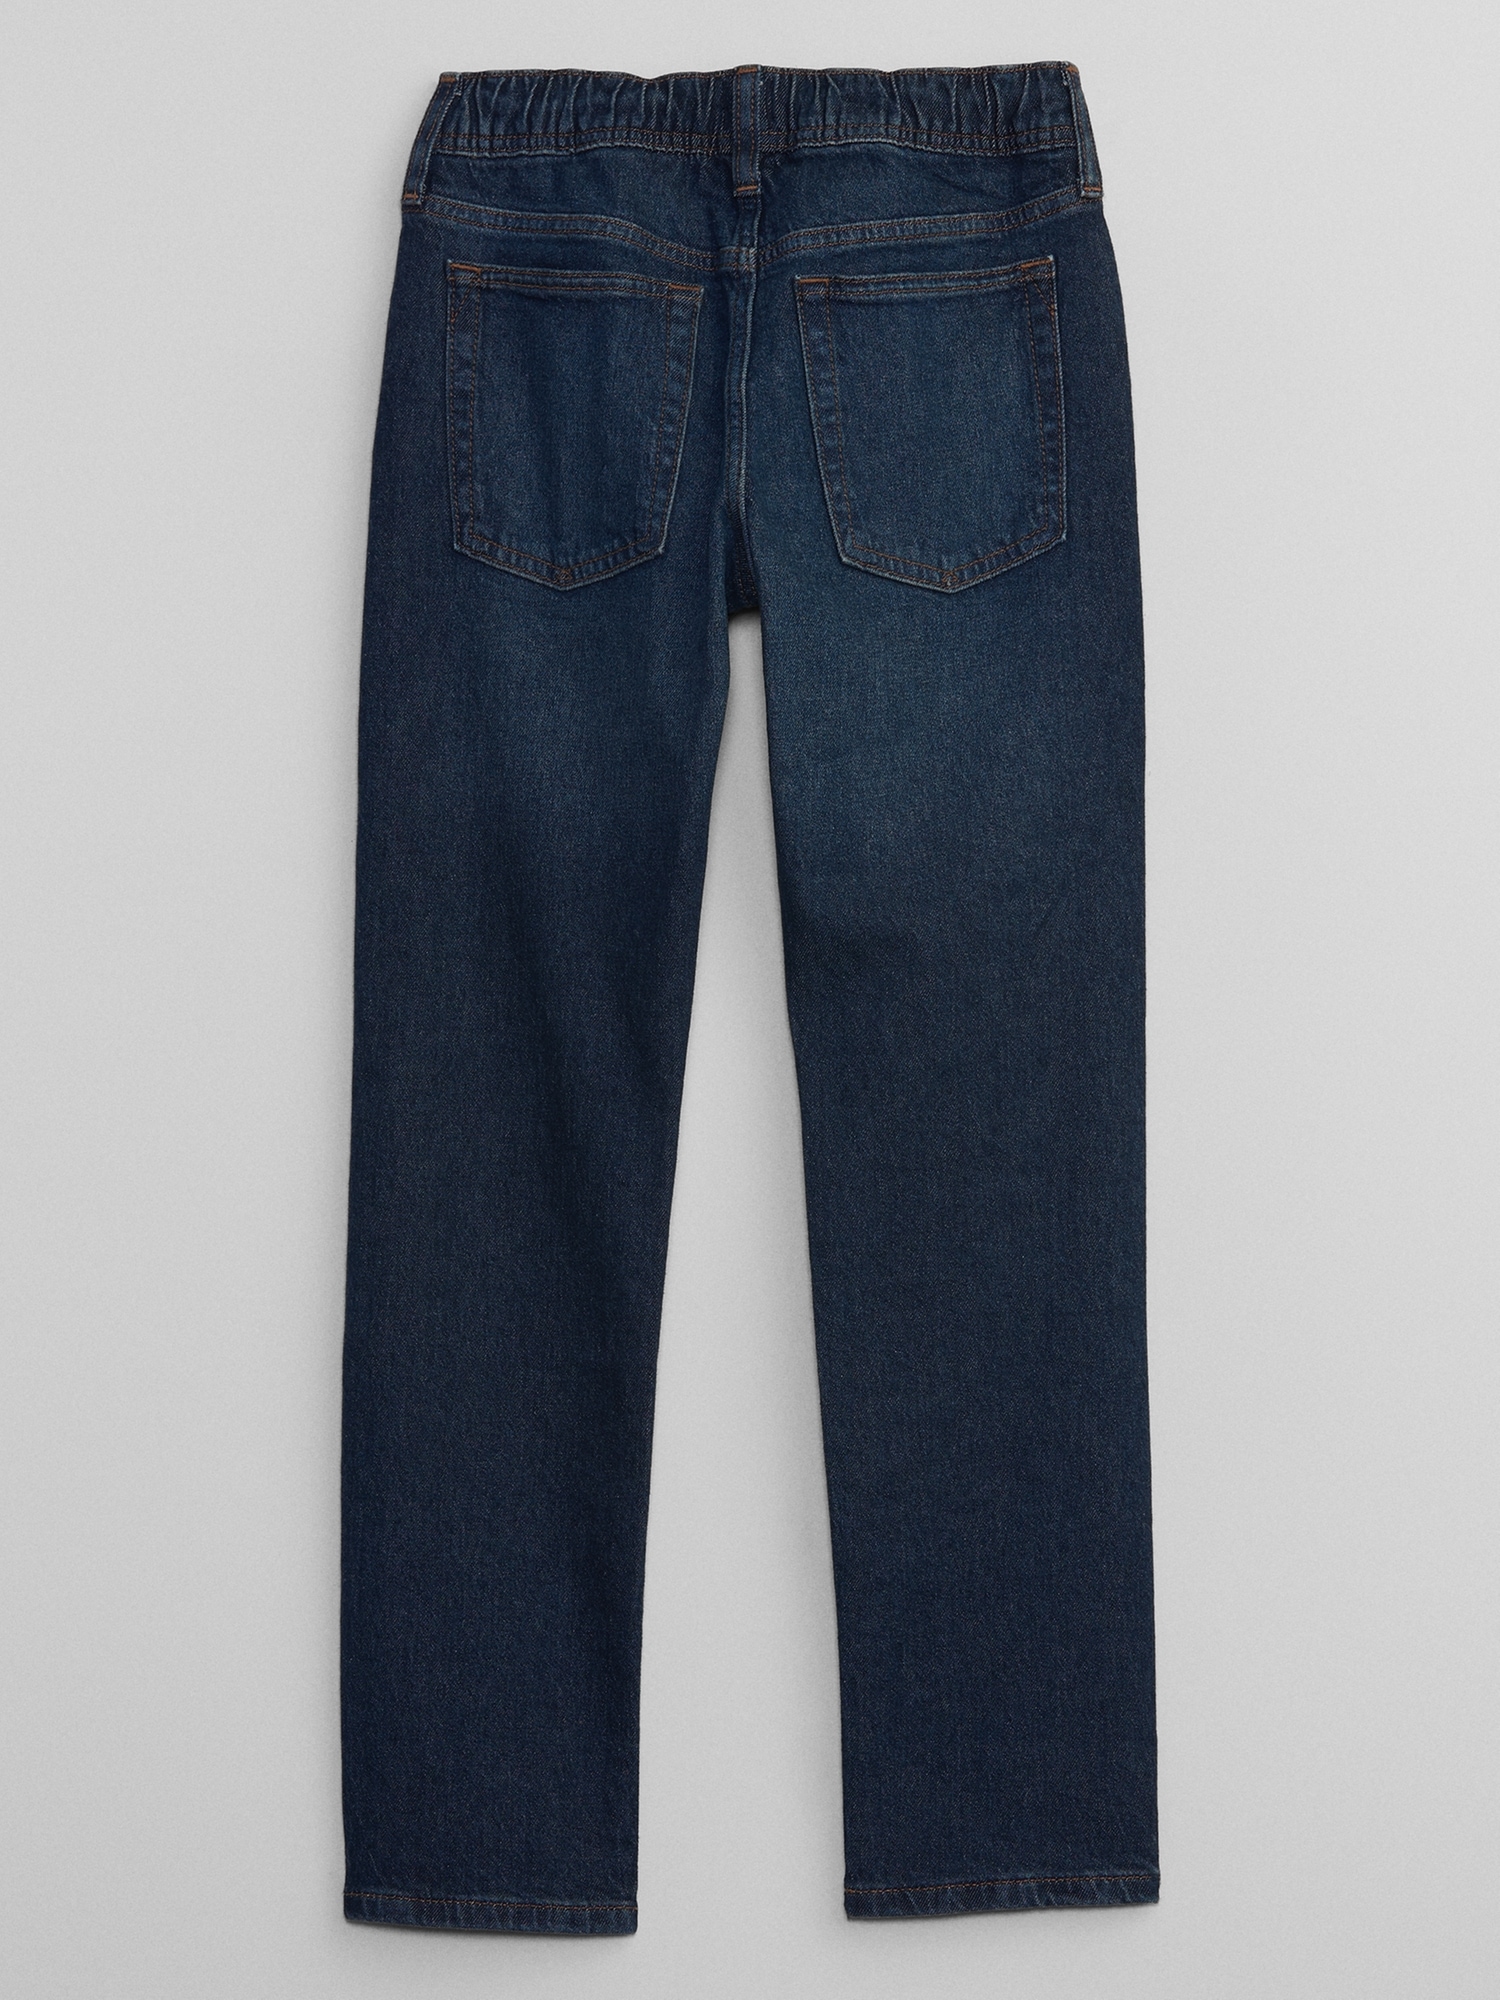 Kids Slim Pull-On Jeans with Washwell | Gap Factory